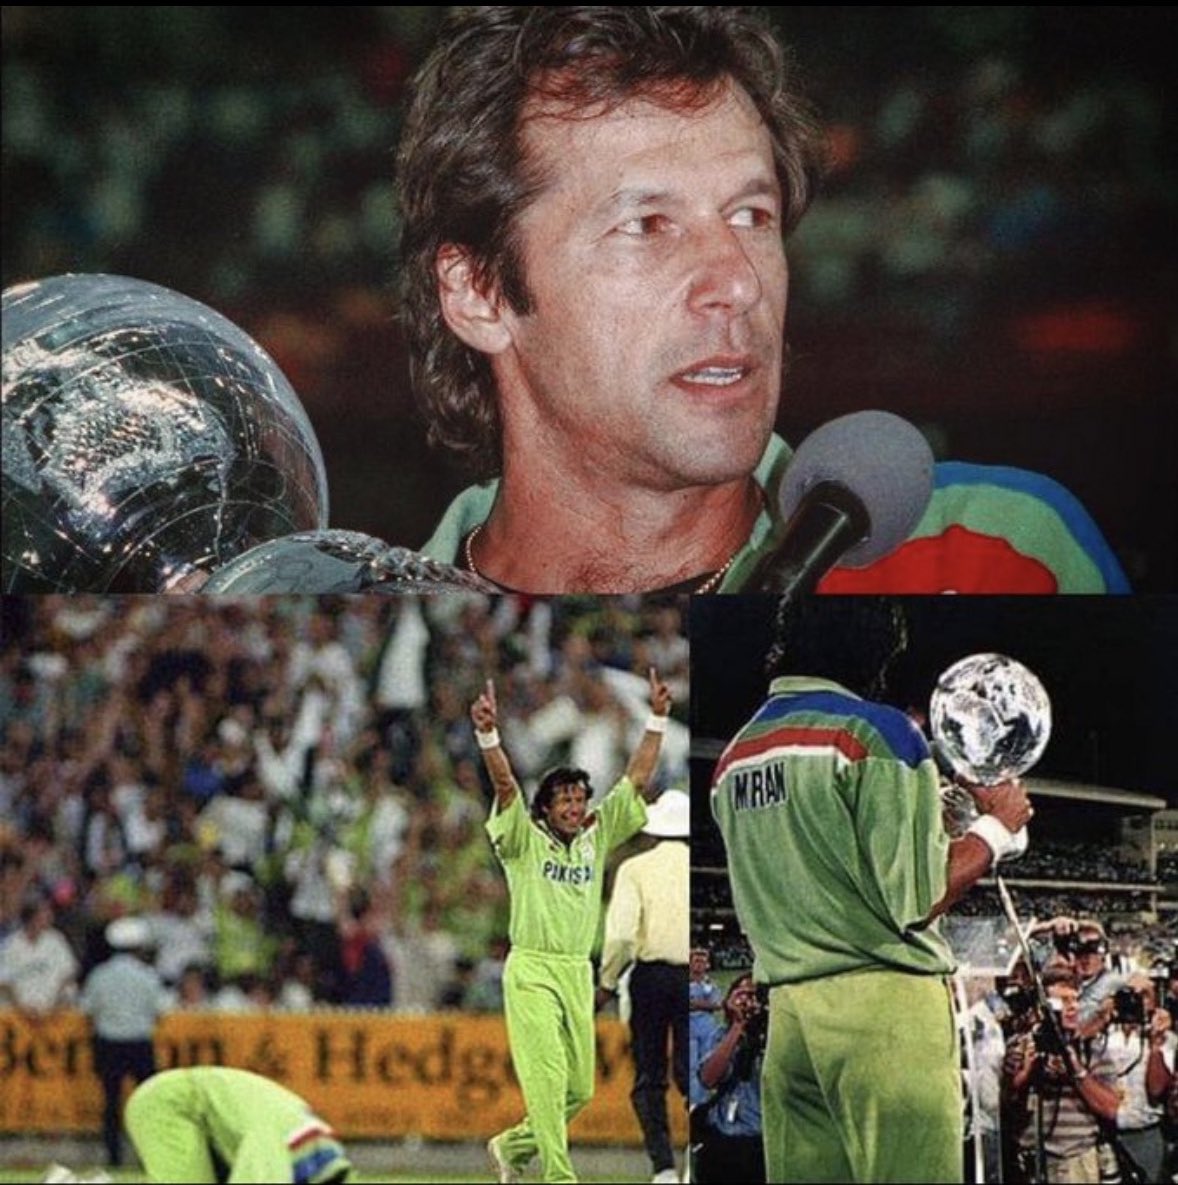 On this day in 1992, Pakistan Cricket Team won the ICC Cricket World Cup led by our Kaptaan @ImranKhanPTI 🇵🇰